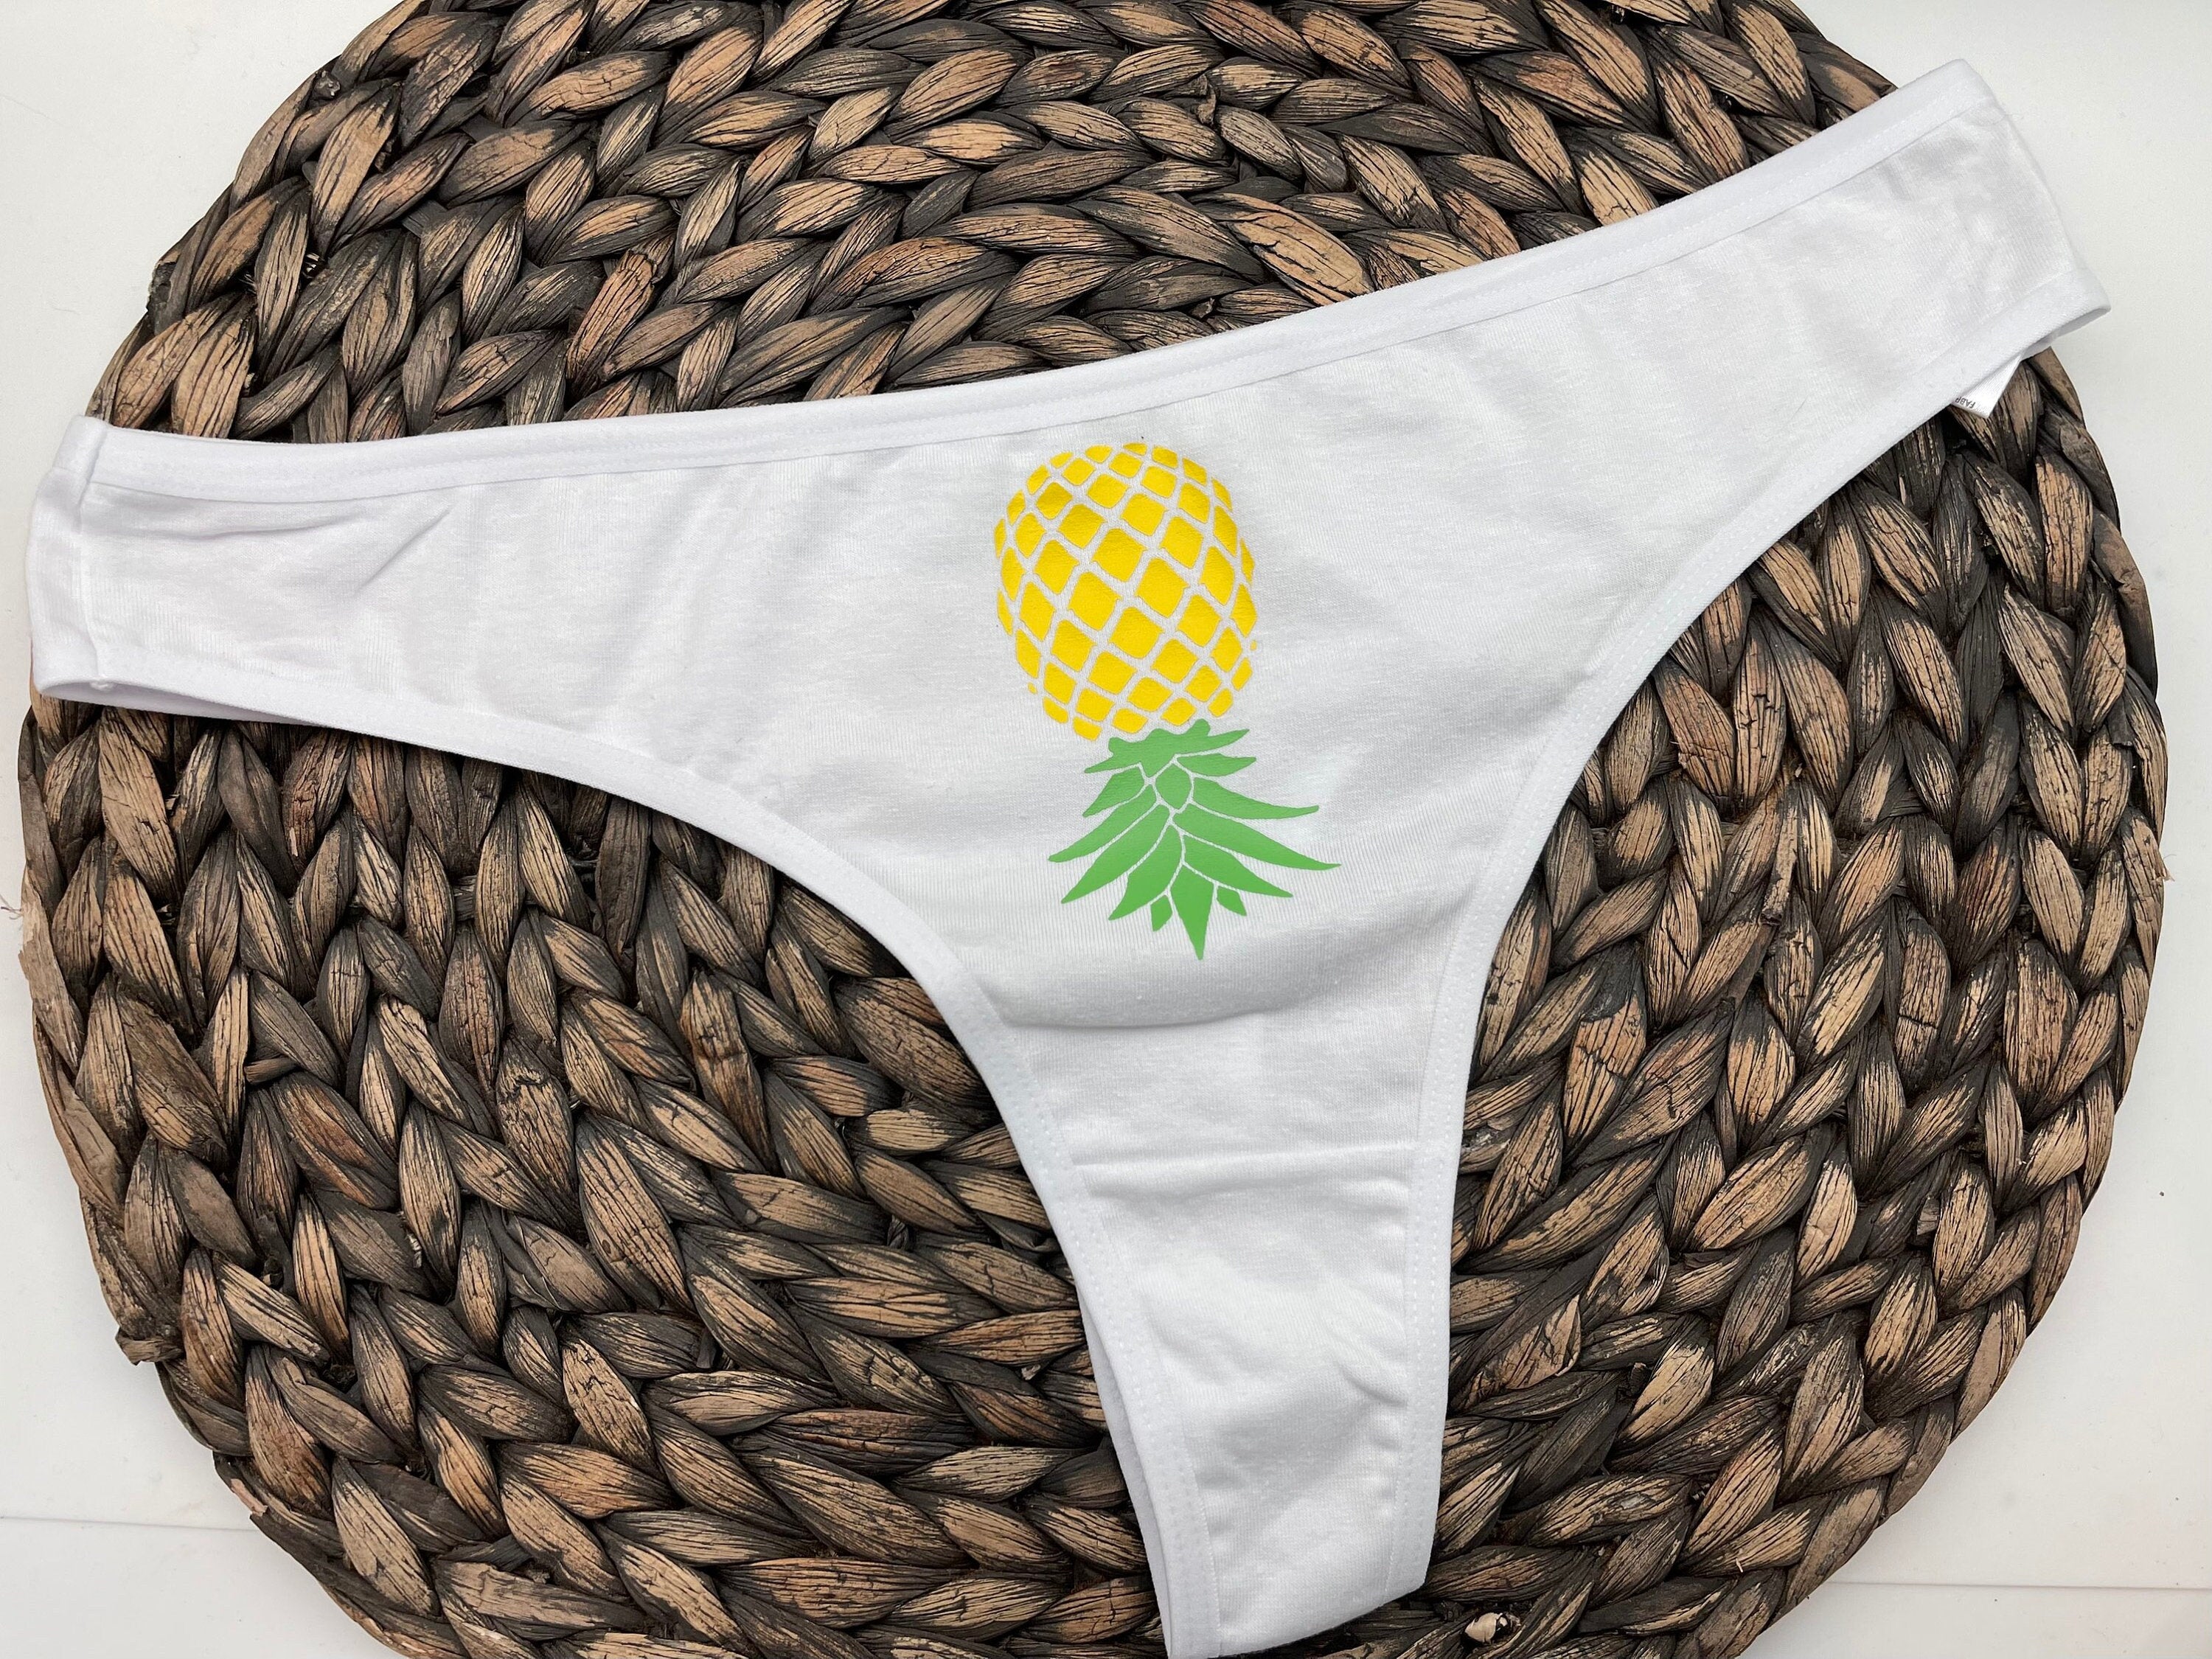 Cute Upside Down Pineapple Thong - Playful Lingerie for Swingers